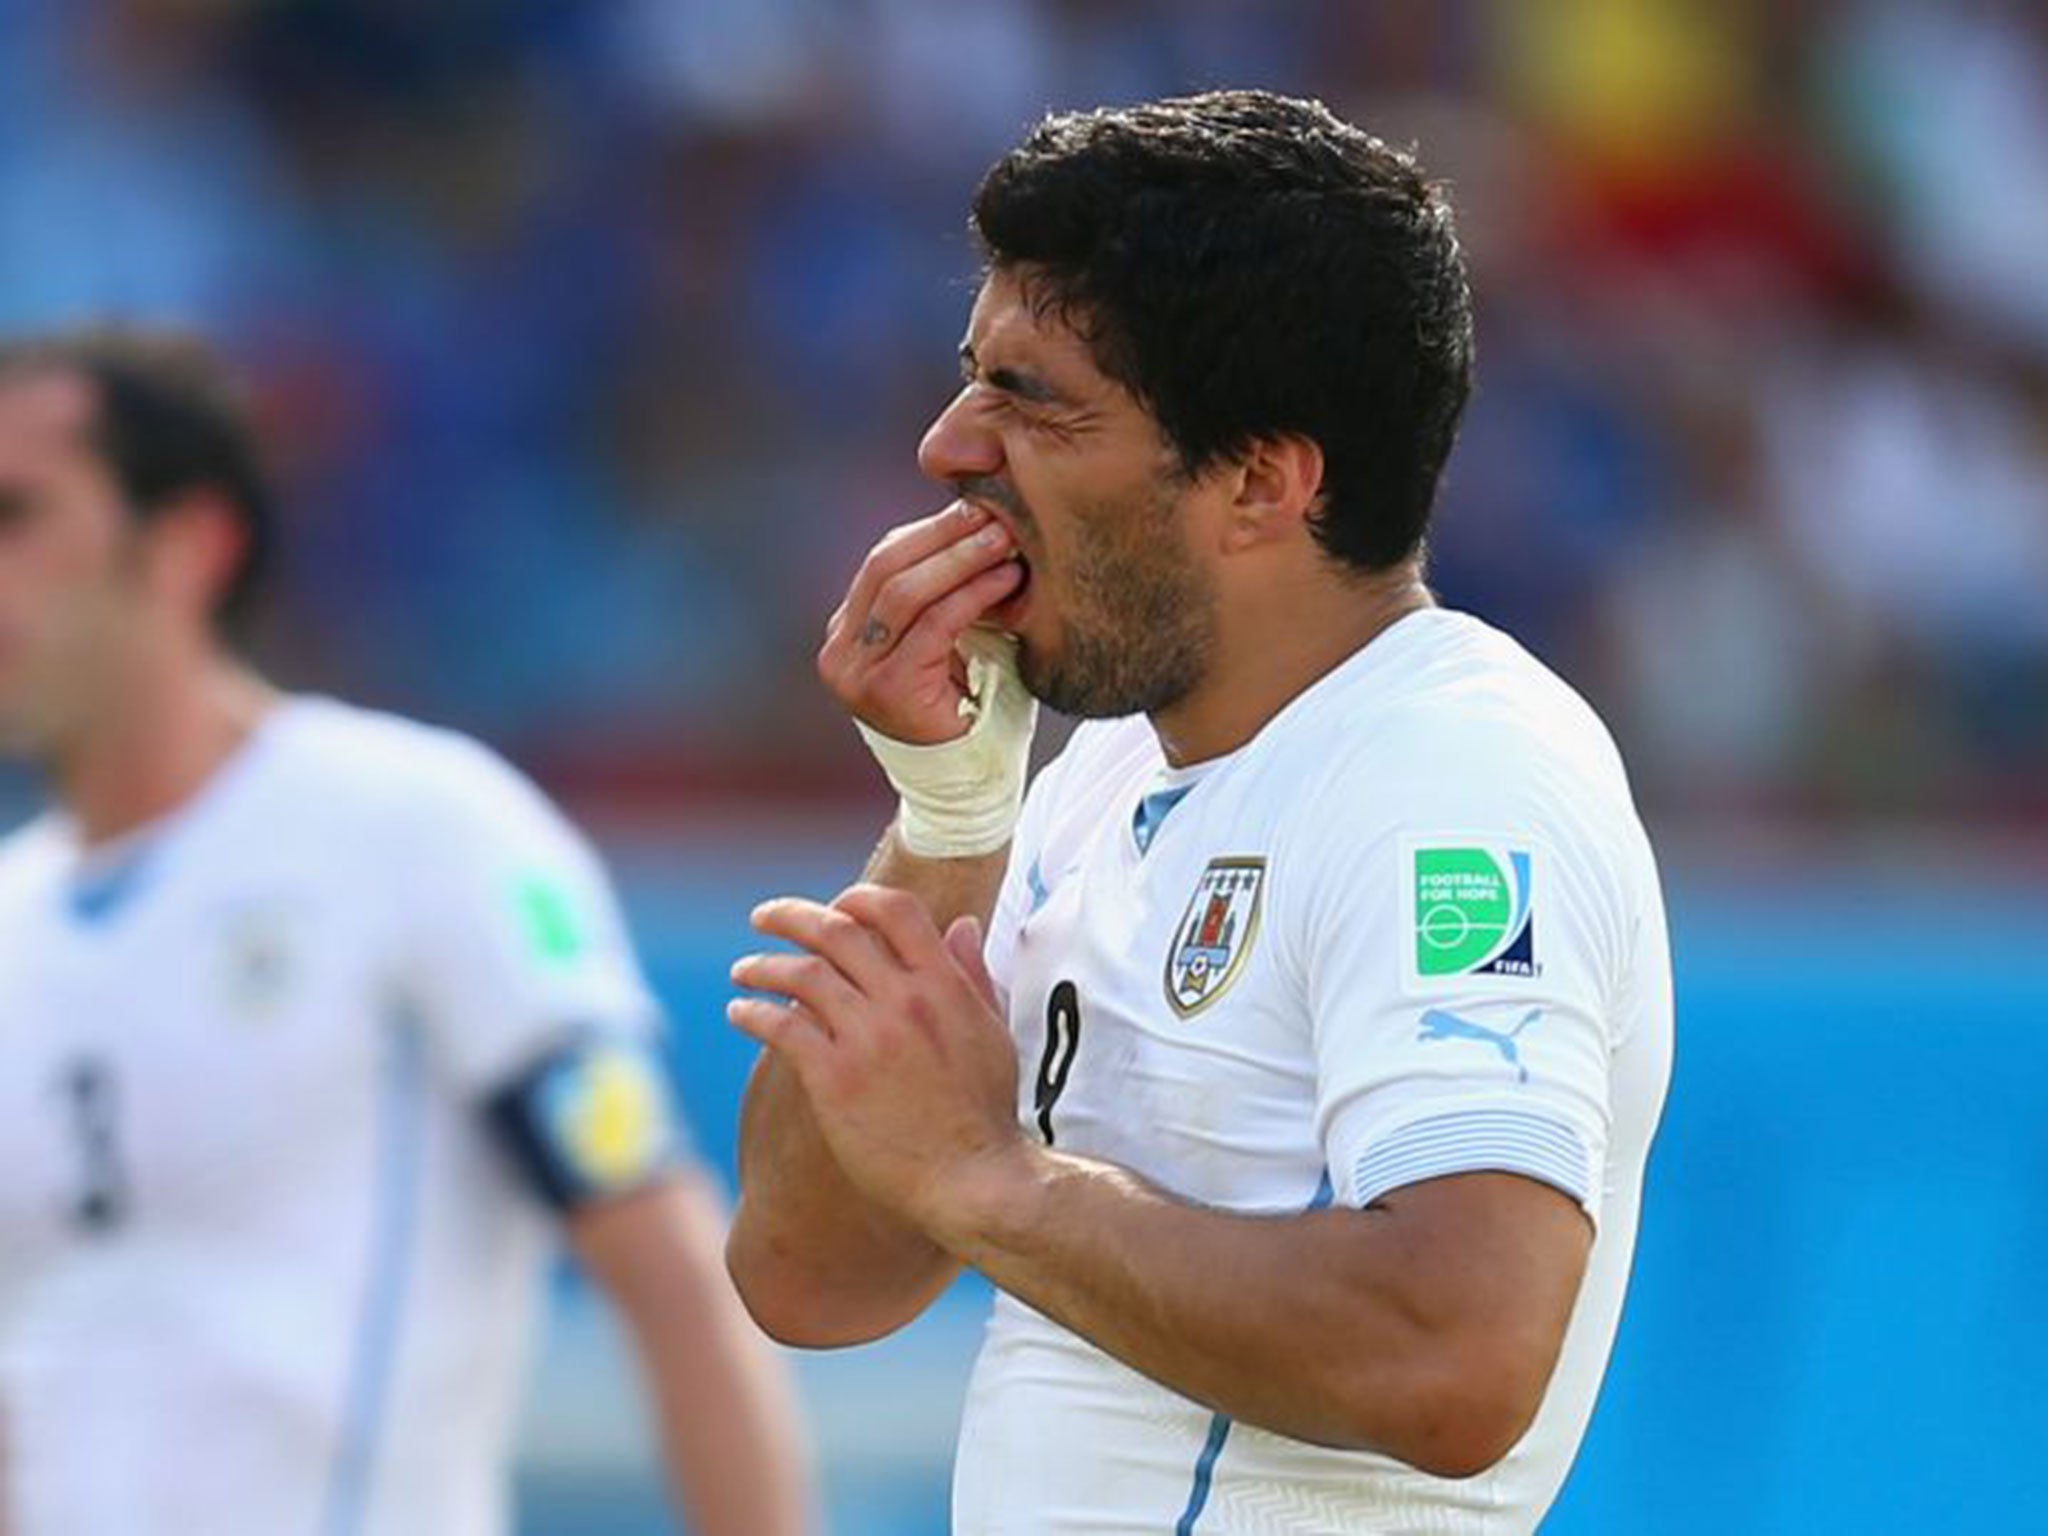 Suarez said he 'lost his balance and fell on top of his opponent' as opposed to biting Chiellini